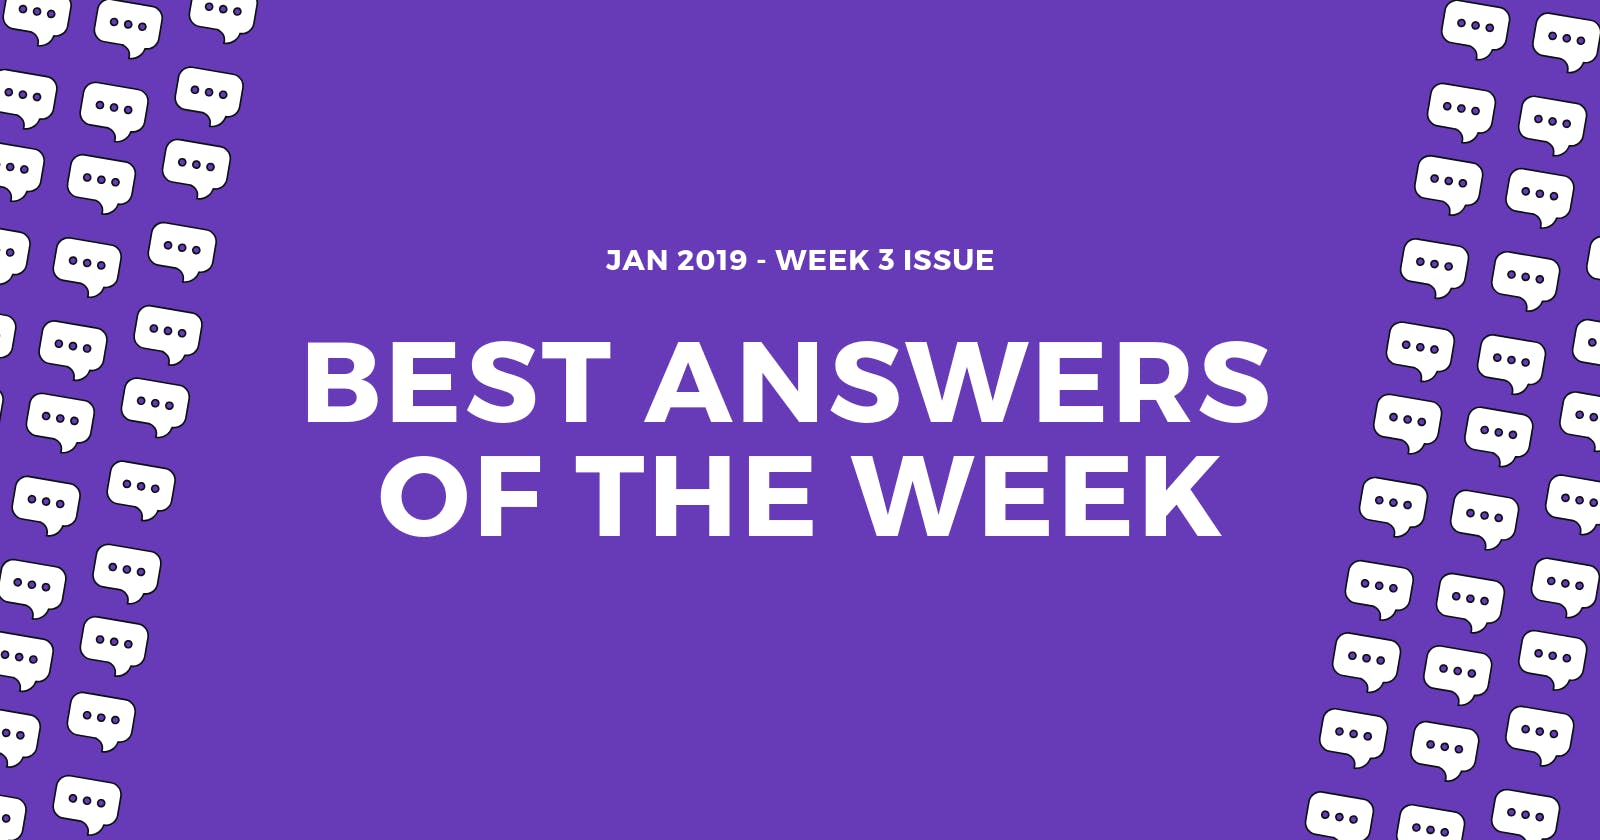 Best answers of the week: January 2019 (Week 3)